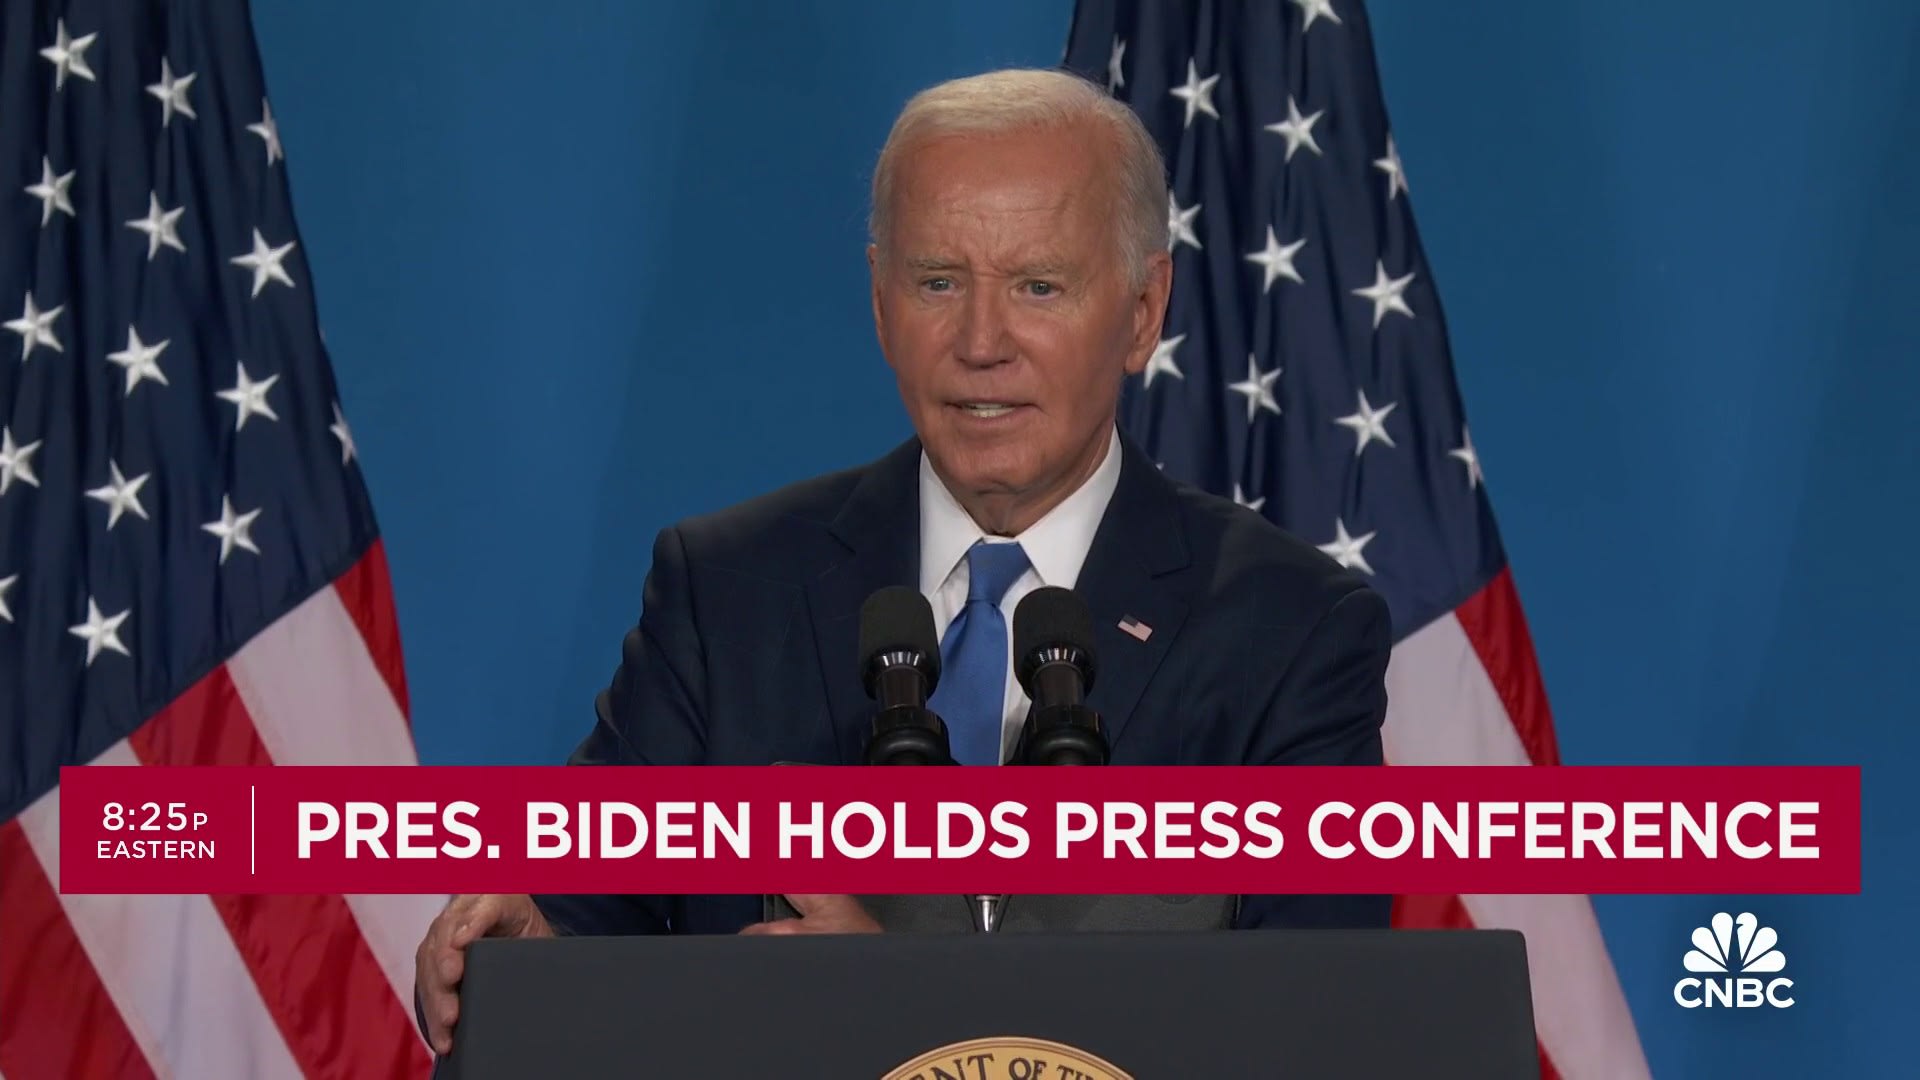 Pres. Biden: Won't drop out unless polls say 'there's no way you can win'